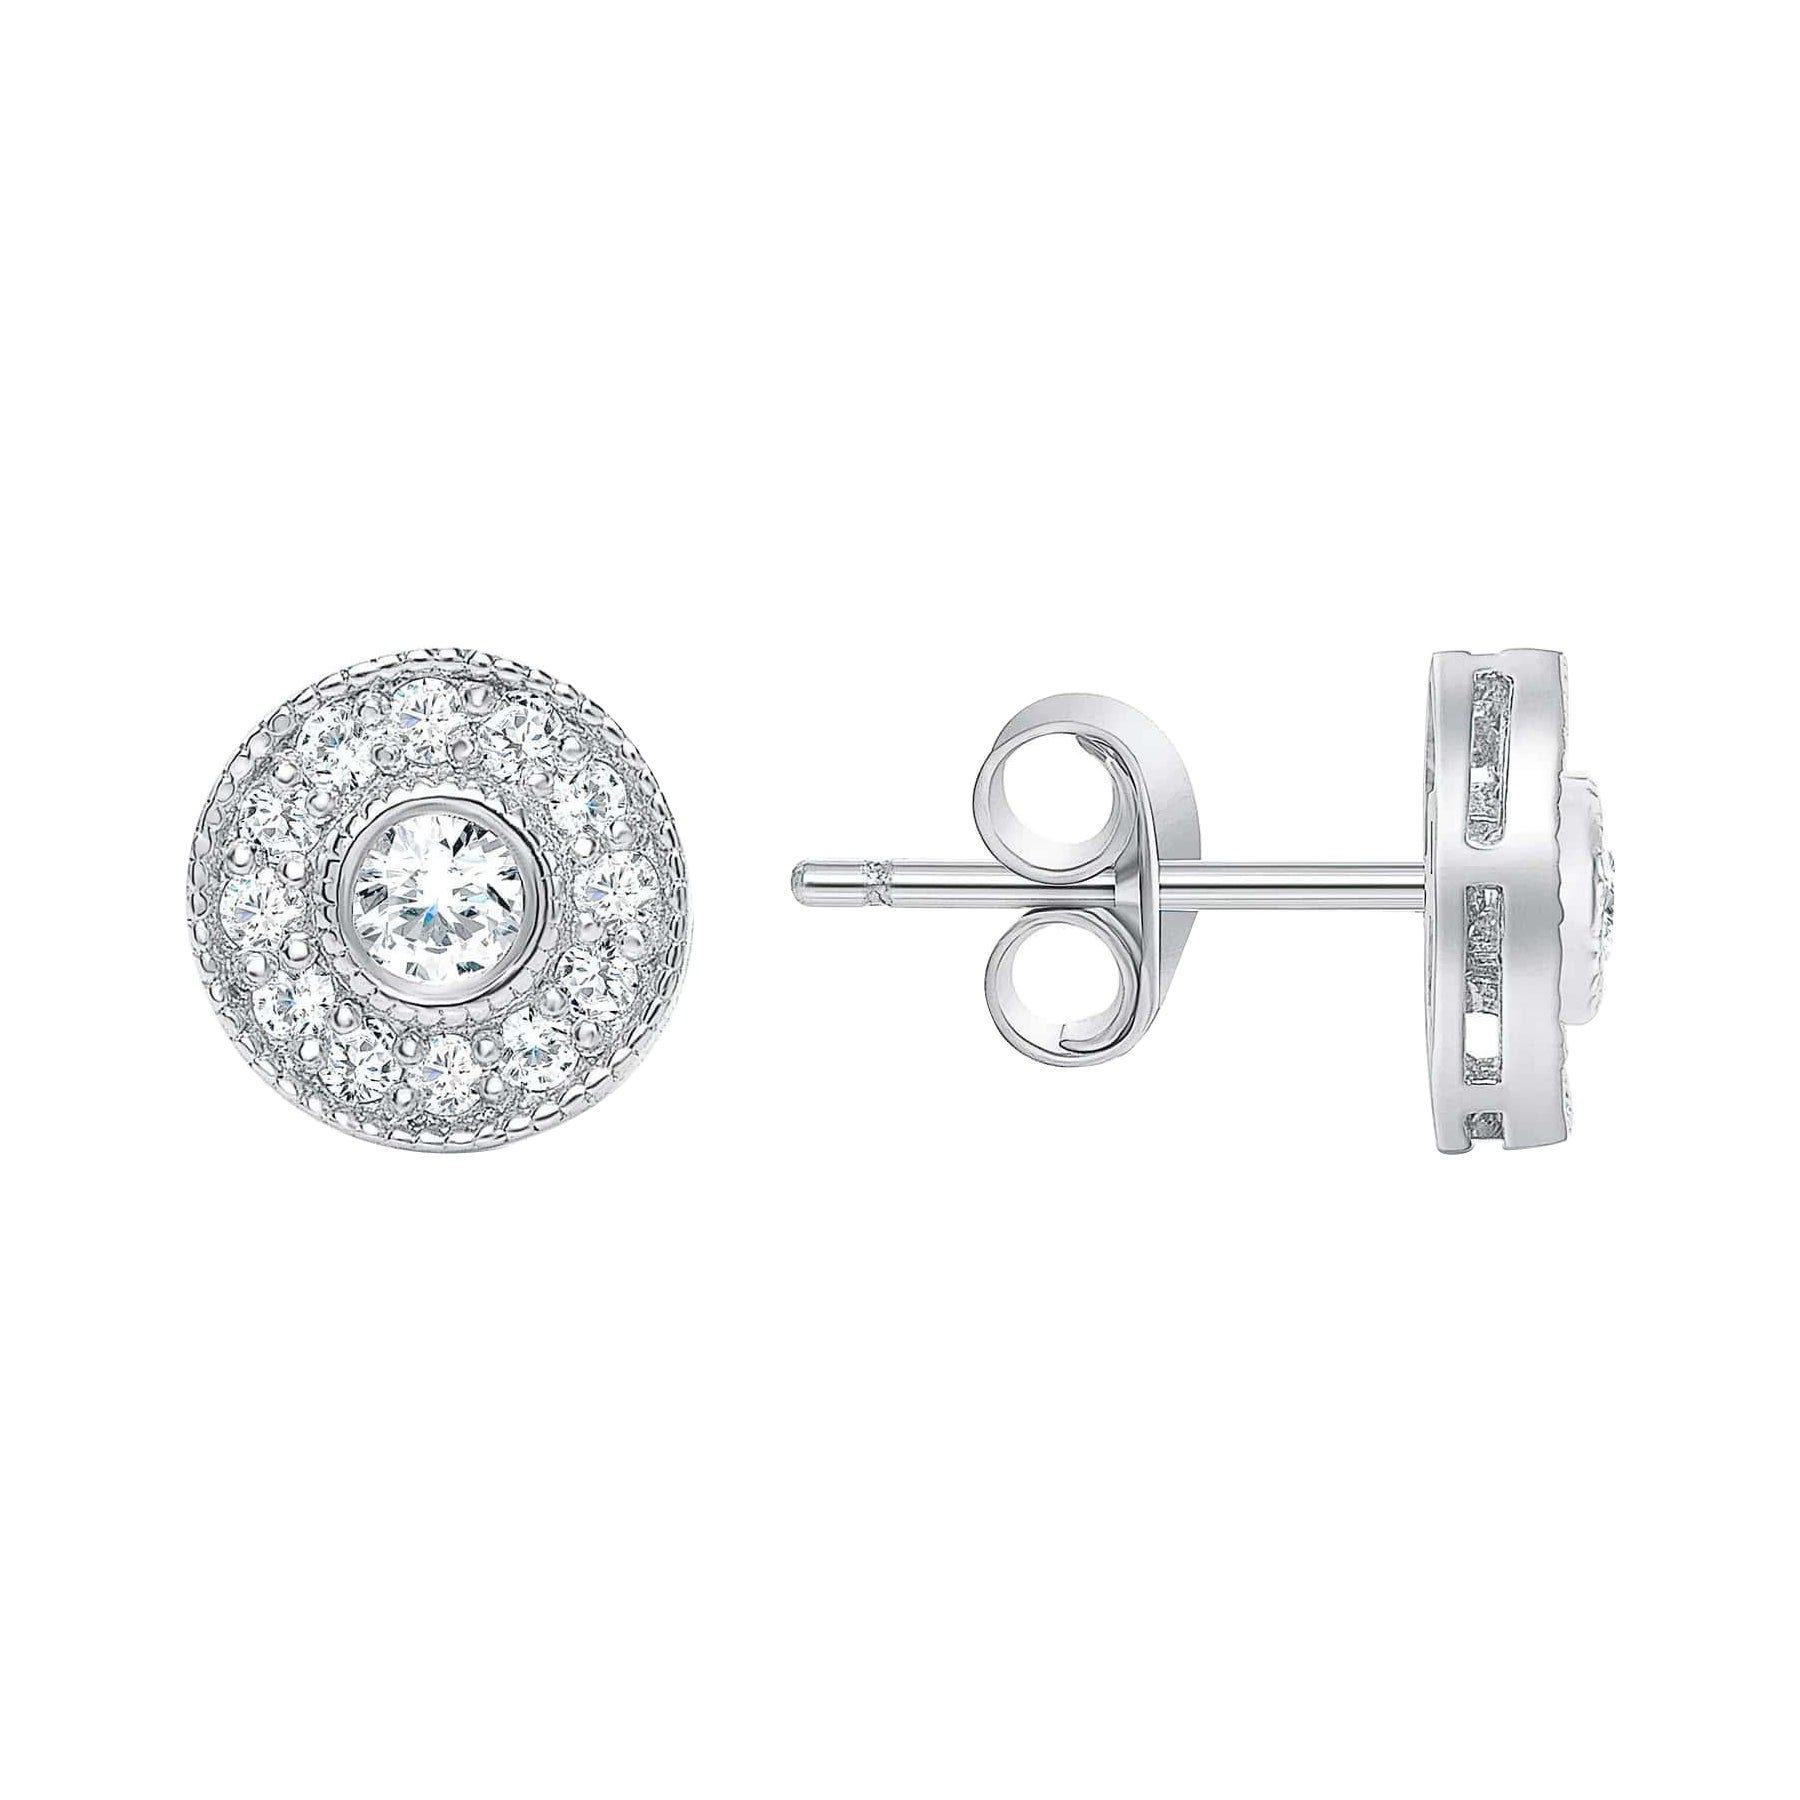 Perfect as a gift for Anniversary, Birthday, Wedding, and/or Holiday.

Earring Information
Setting : Halo
Metal : 14k Solid Gold
Diamond Carat Weight : 1 Carat
Diamond Cut : Round Cut Natural Conflict Free Diamond 
Diamond Clarity : VS -SI
Diamond